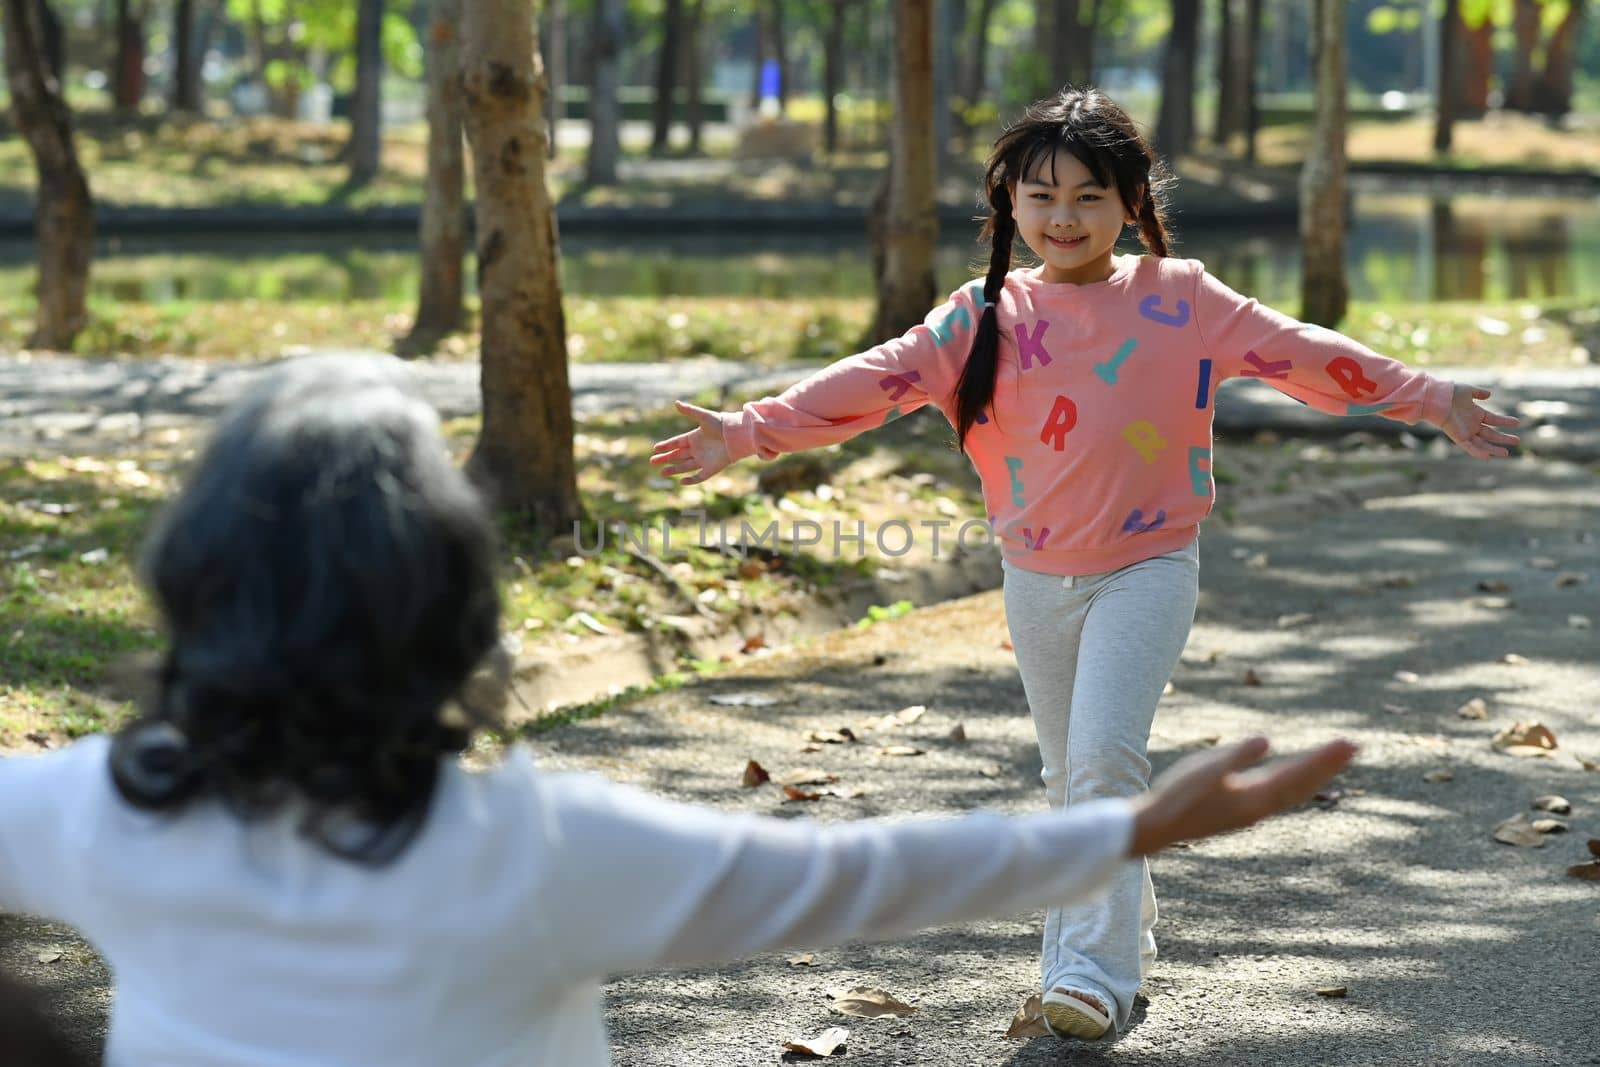 Loving grandmother stretching out arms to side while smiling grandchild running towards her in the park. Family and love concept.